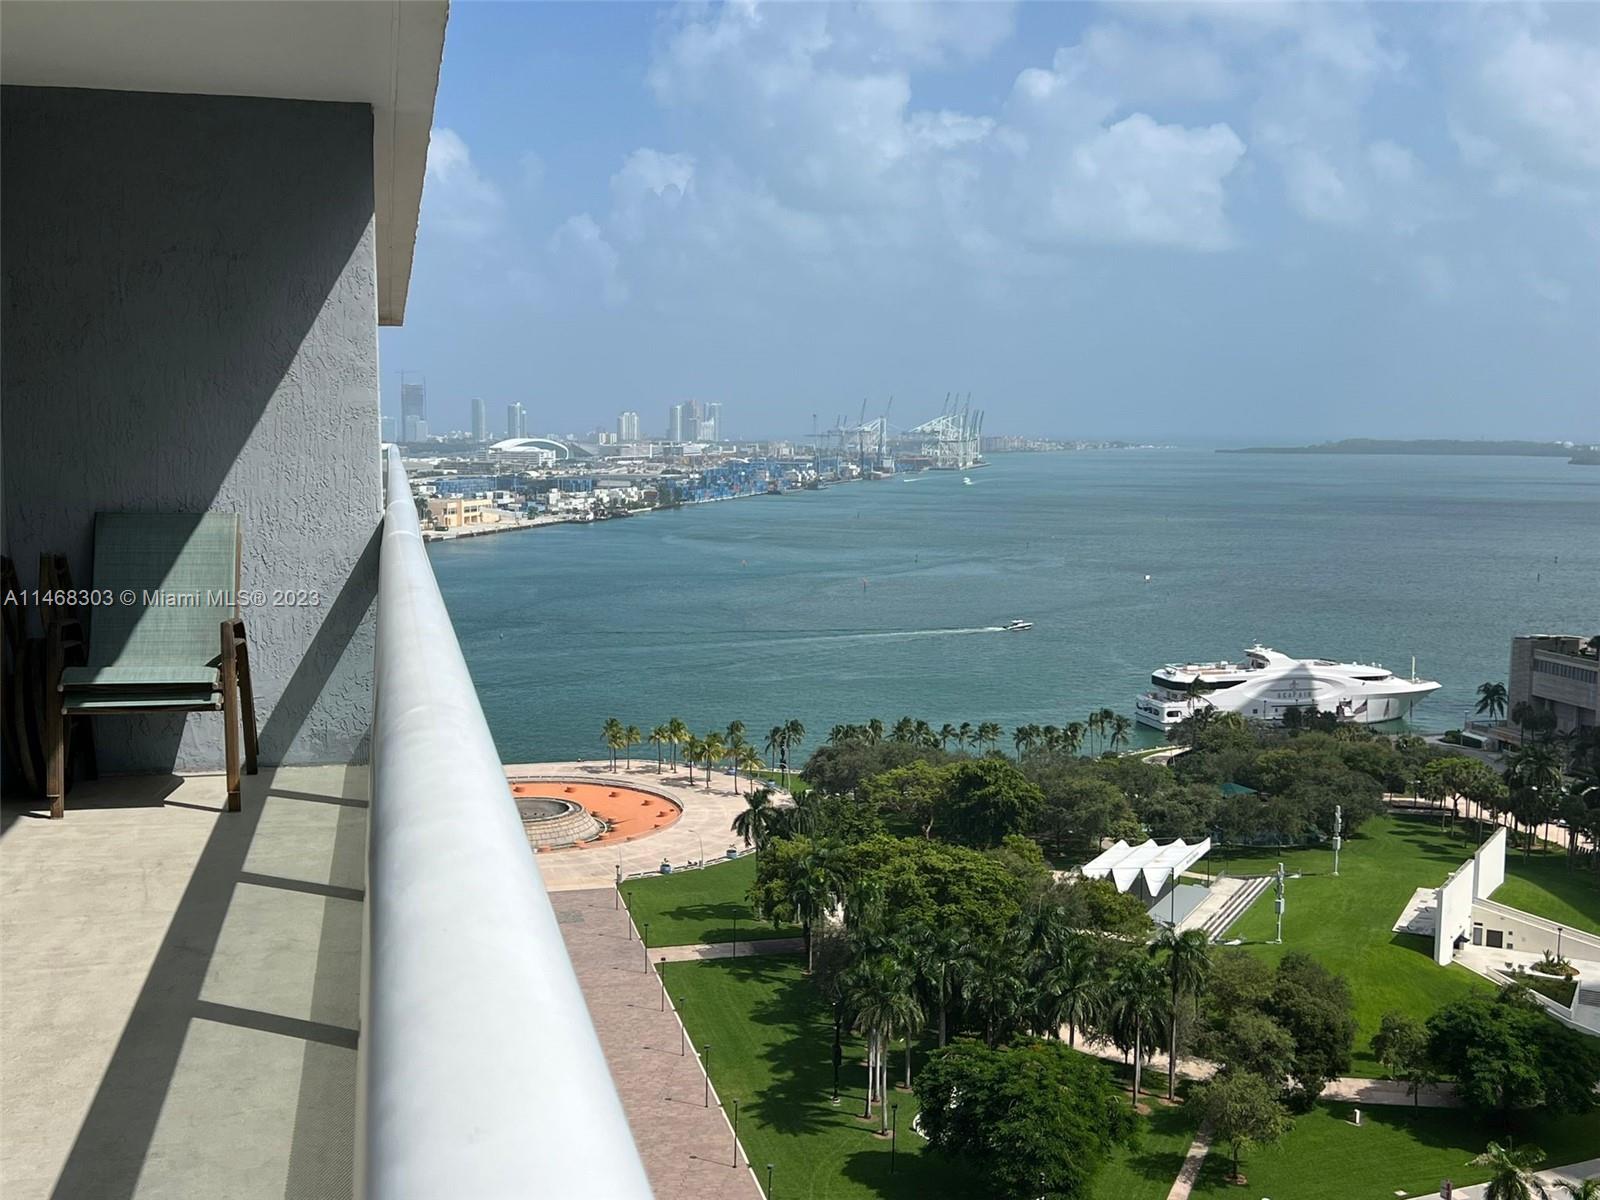 Perfect investment opportunity in one of Downtown Miami’s most iconic building. This 2/2 Corner unit with huge wraparound balcony and split floorplan. Beautiful bay and city views. Tastefully furnished and in move in ready condition. Cable, Internet and water all included in HOA. 1 assigned parking space. This spectacular condo has amazing first-class amenities that include: Olympic-size heated pool, state-of-the-art spa, fitness center, security, valet parking and more .AMAZING LOCATION!!! Right across from Bayfront Park. Easily walk to 5 star restaurants, Whole Foods, Silverspot Cinema and much more. 20 minutes to Miami Intl Airport, South Beach, I-95, Coral Gables. Great public transport accessibility - free services on Metromover and Miami Trolley, Metrorail and Brightline.